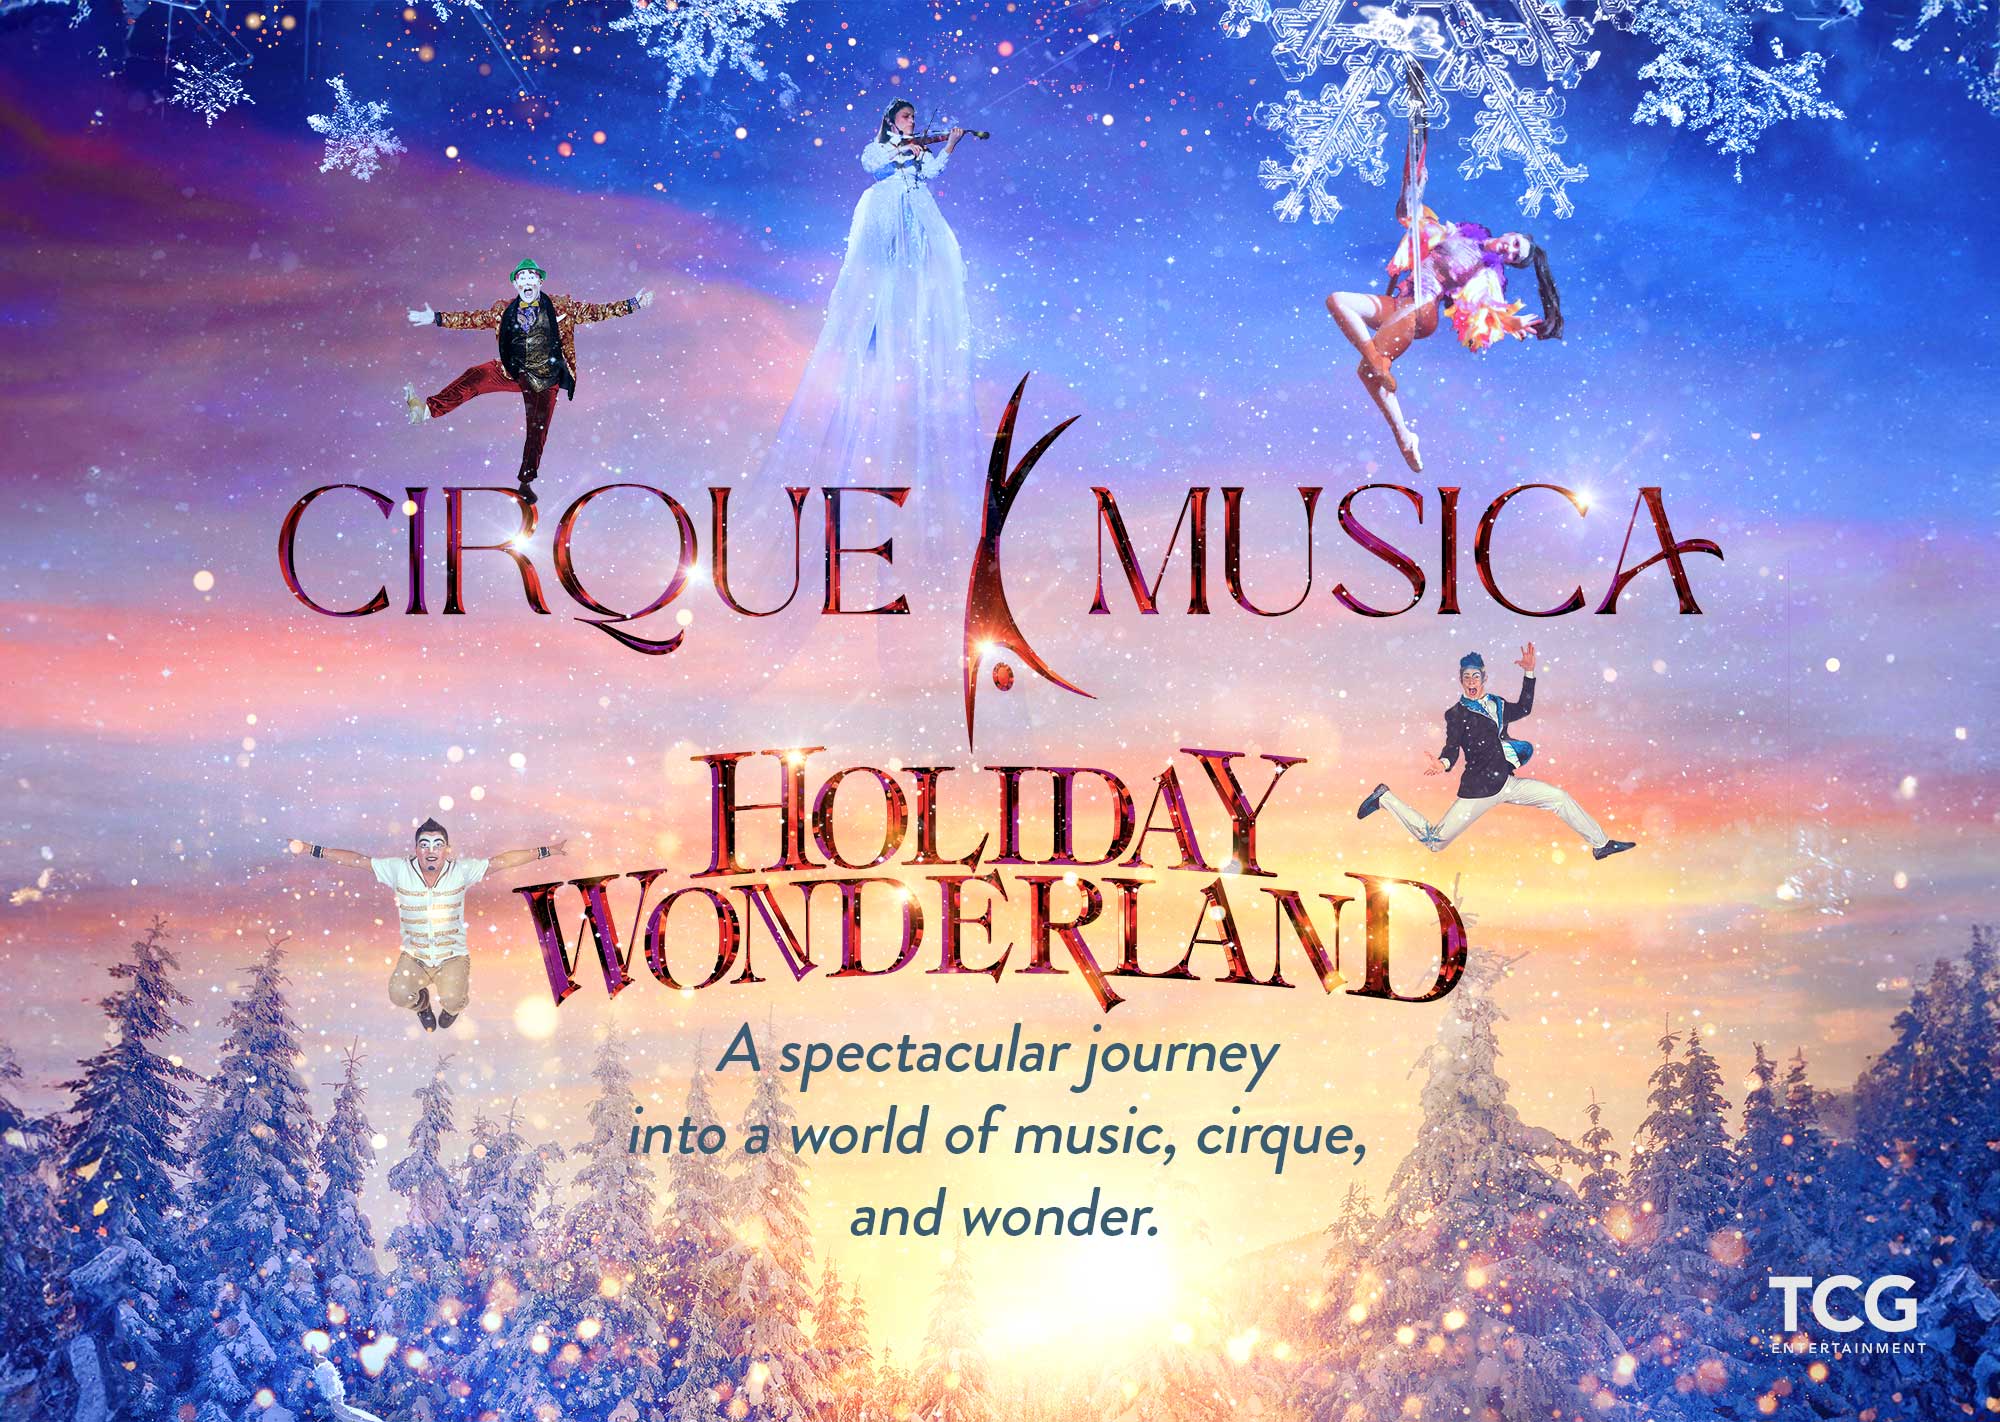 Cirque Musica Holiday Wonderland is back this Christmas Eve